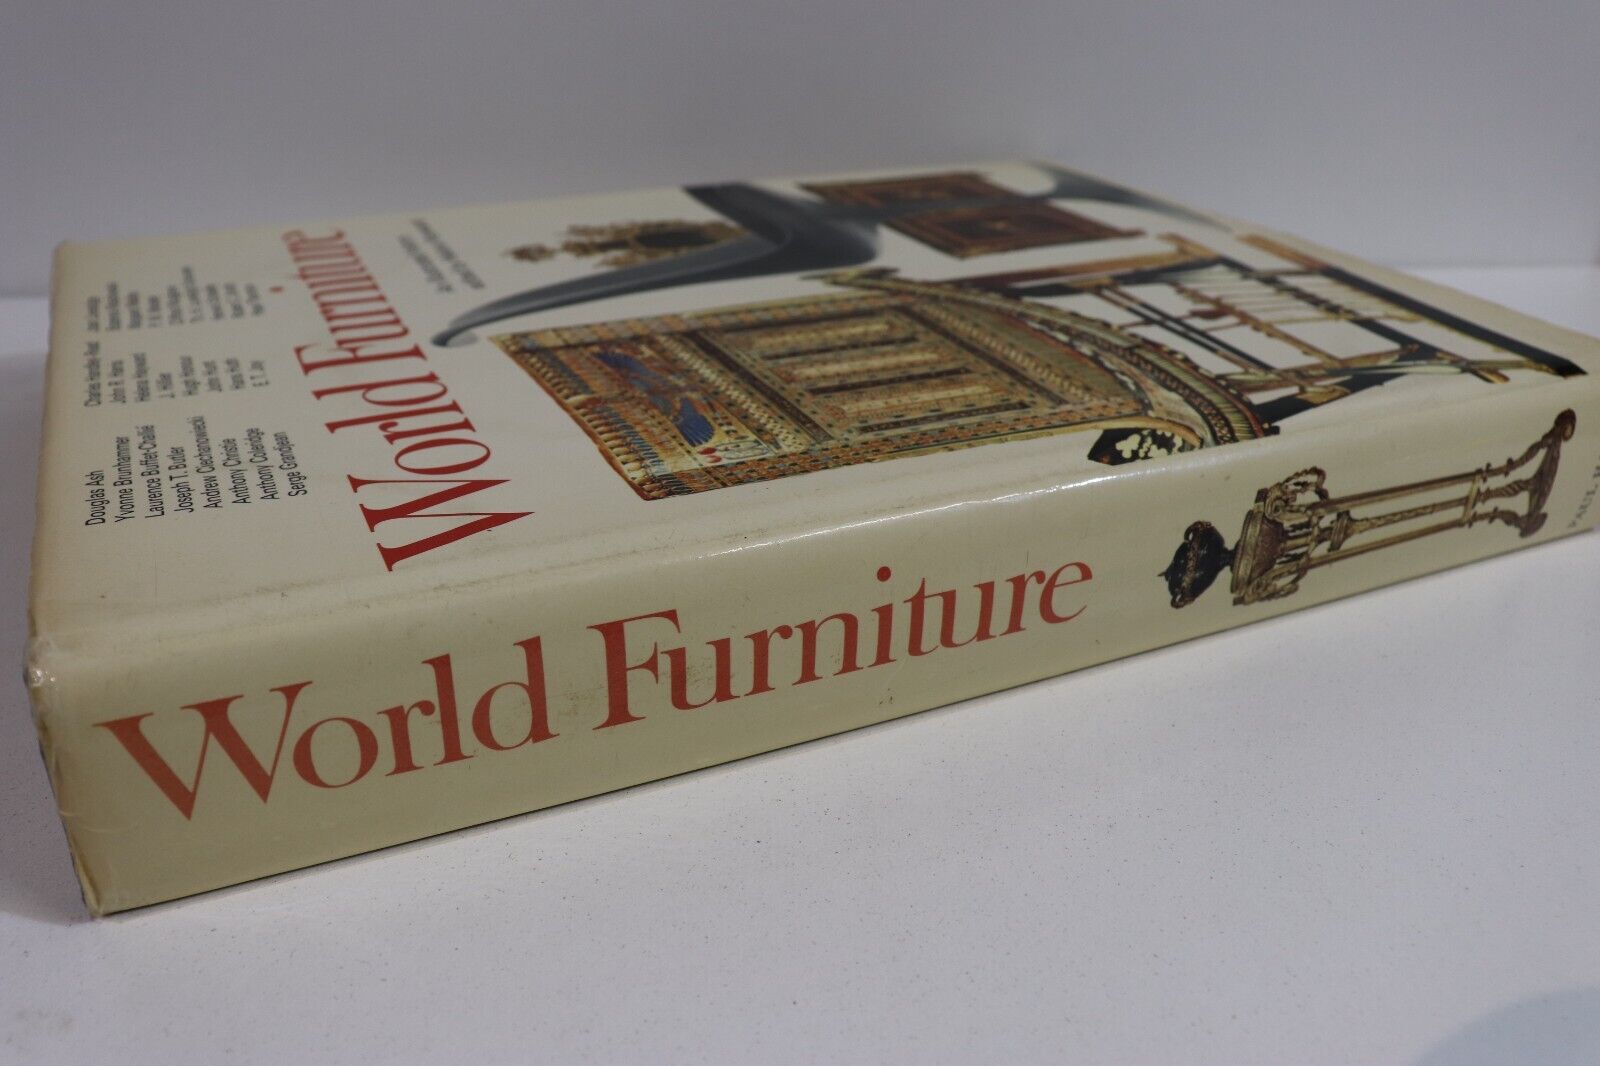 World Furniture by Helena Hayward - 1967 - Antique Furniture Reference Book - 0